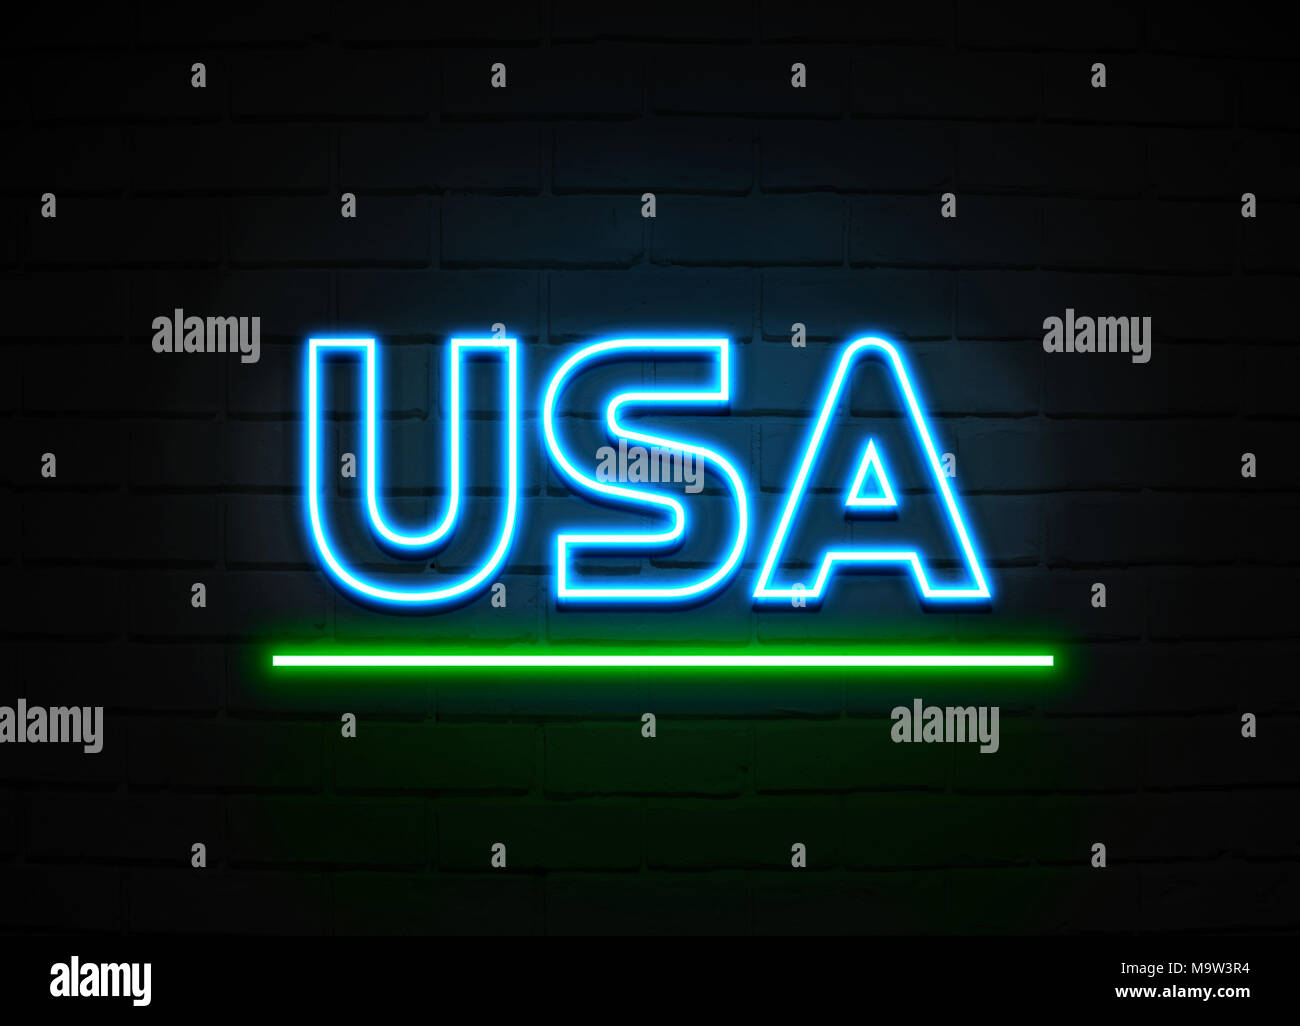 Usa neon sign - Glowing Neon Sign on brickwall wall - 3D rendered royalty free stock illustration. Stock Photo